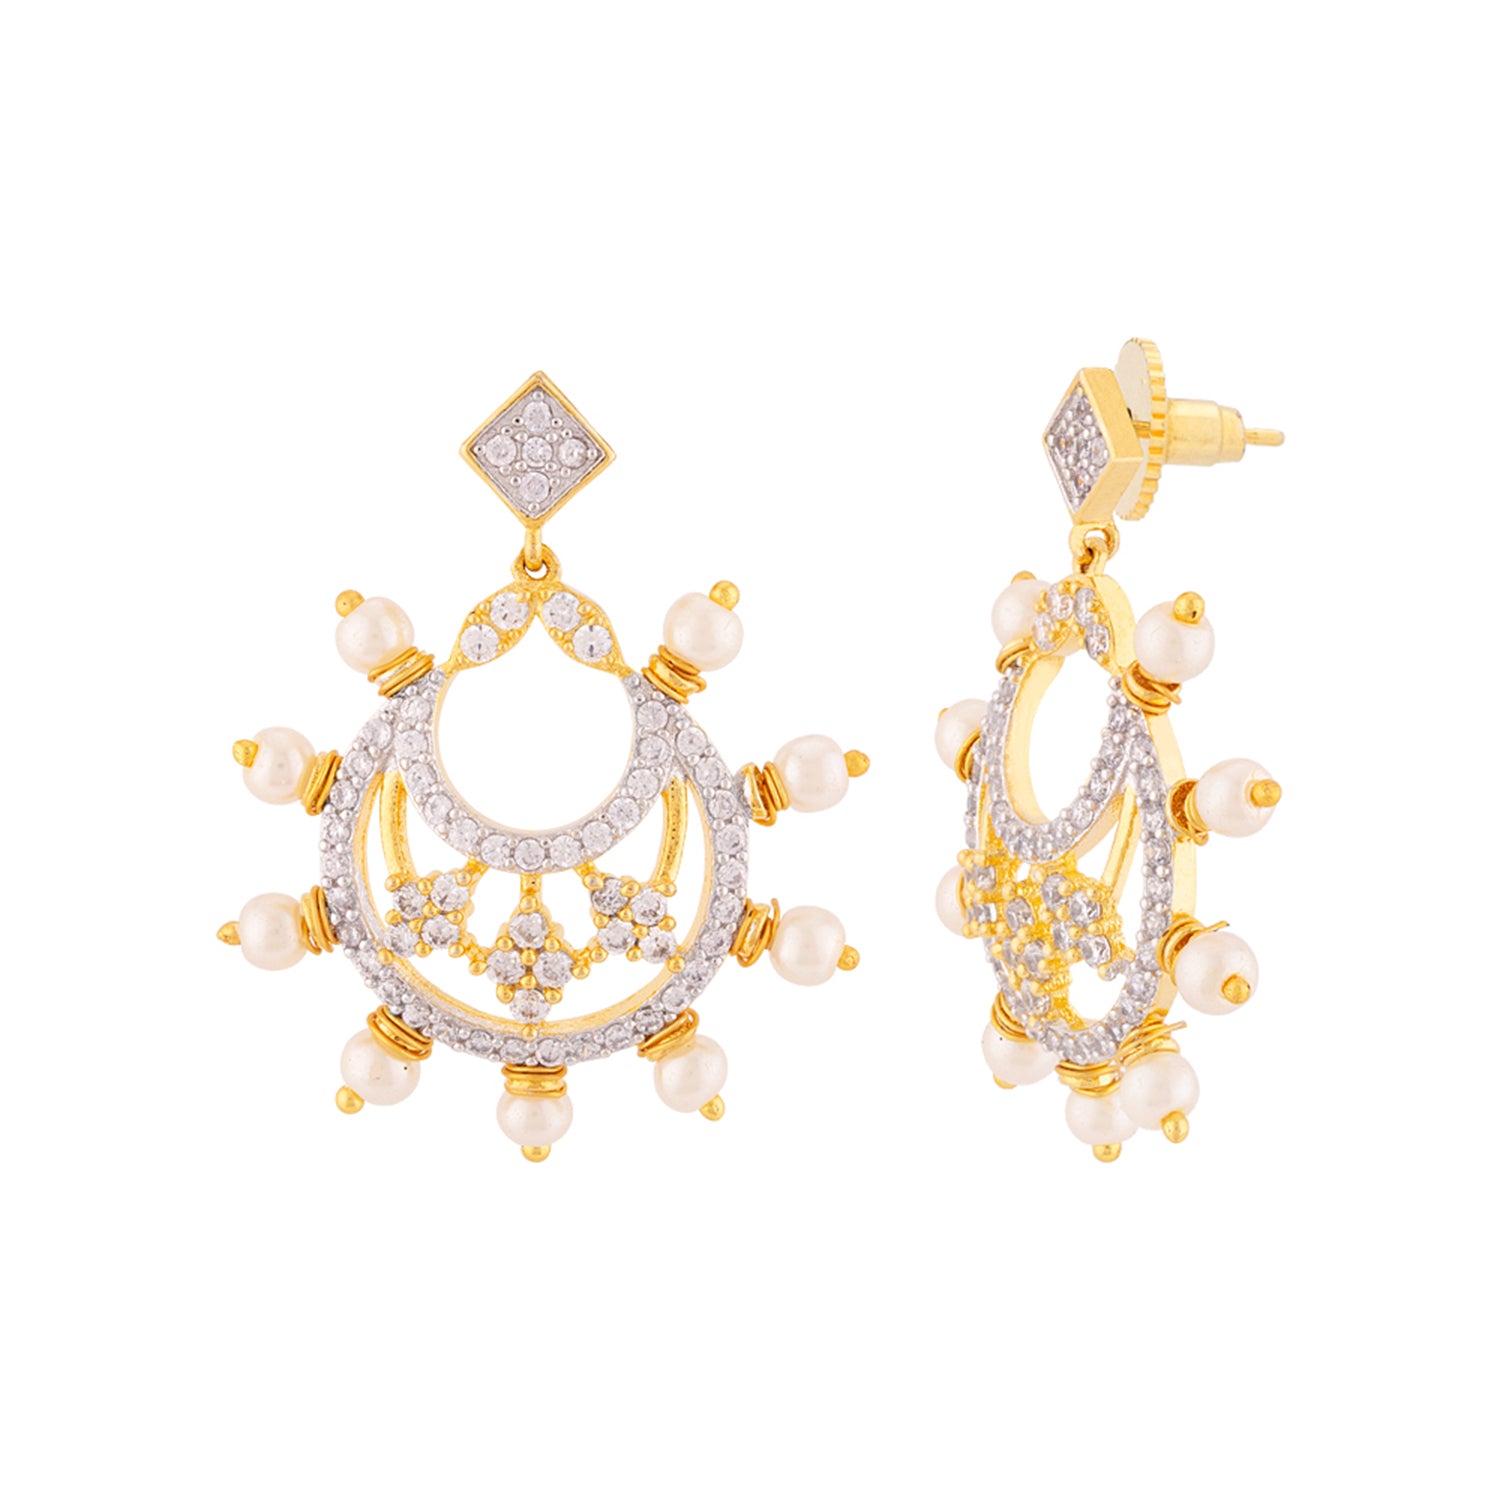 Faux Pearls and American Diamond Gems Adorned Earrings